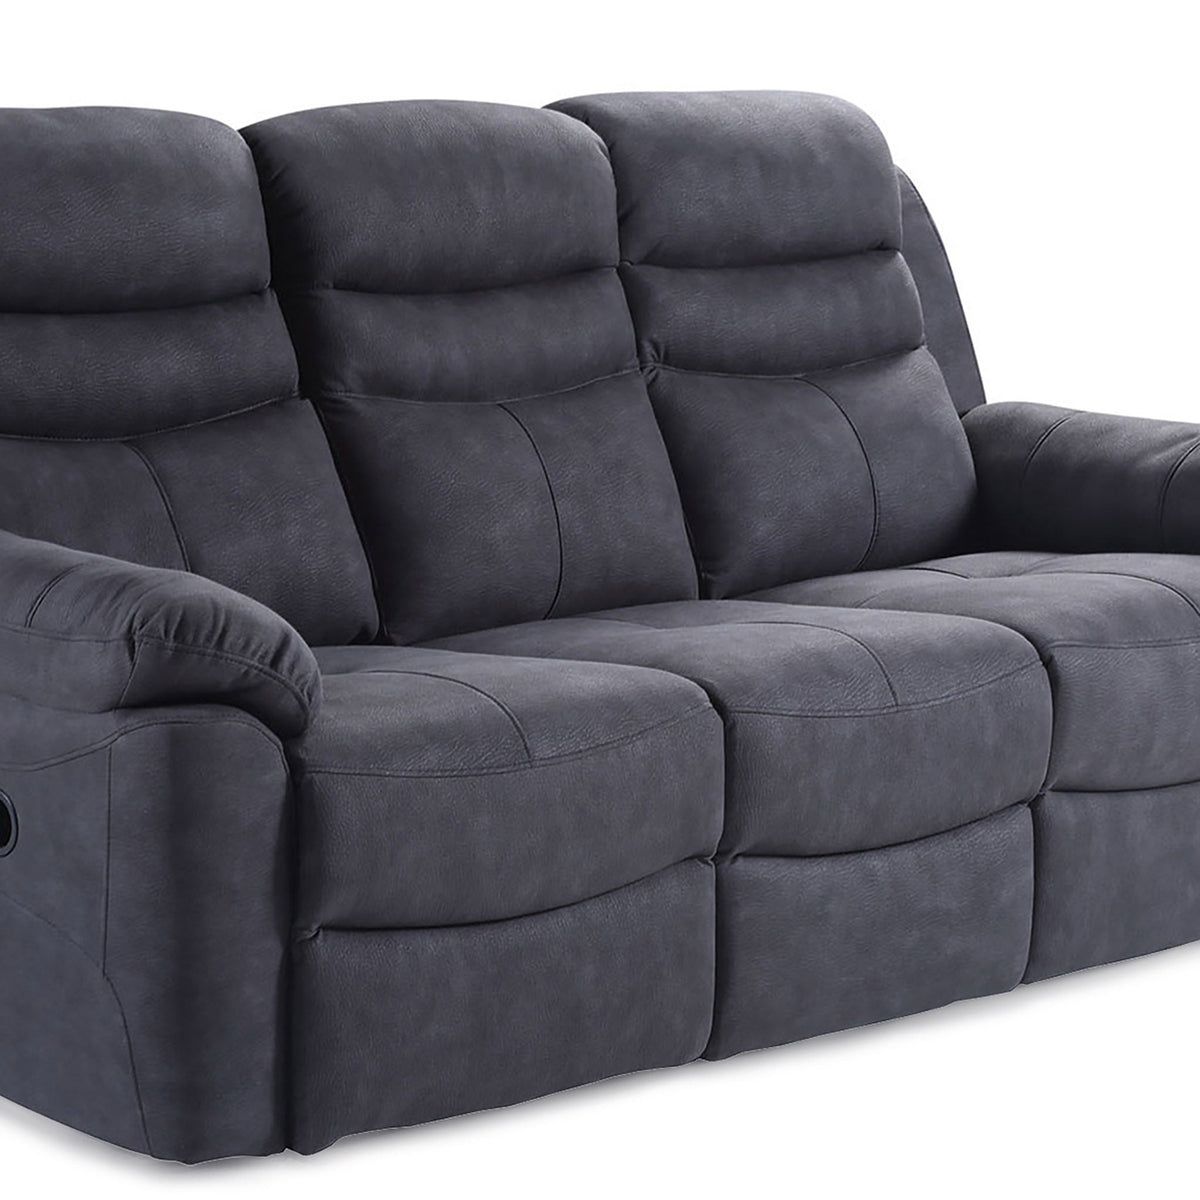 Conway Charcoal 3 Seater Recliner Sofa - Close up of seating cushions